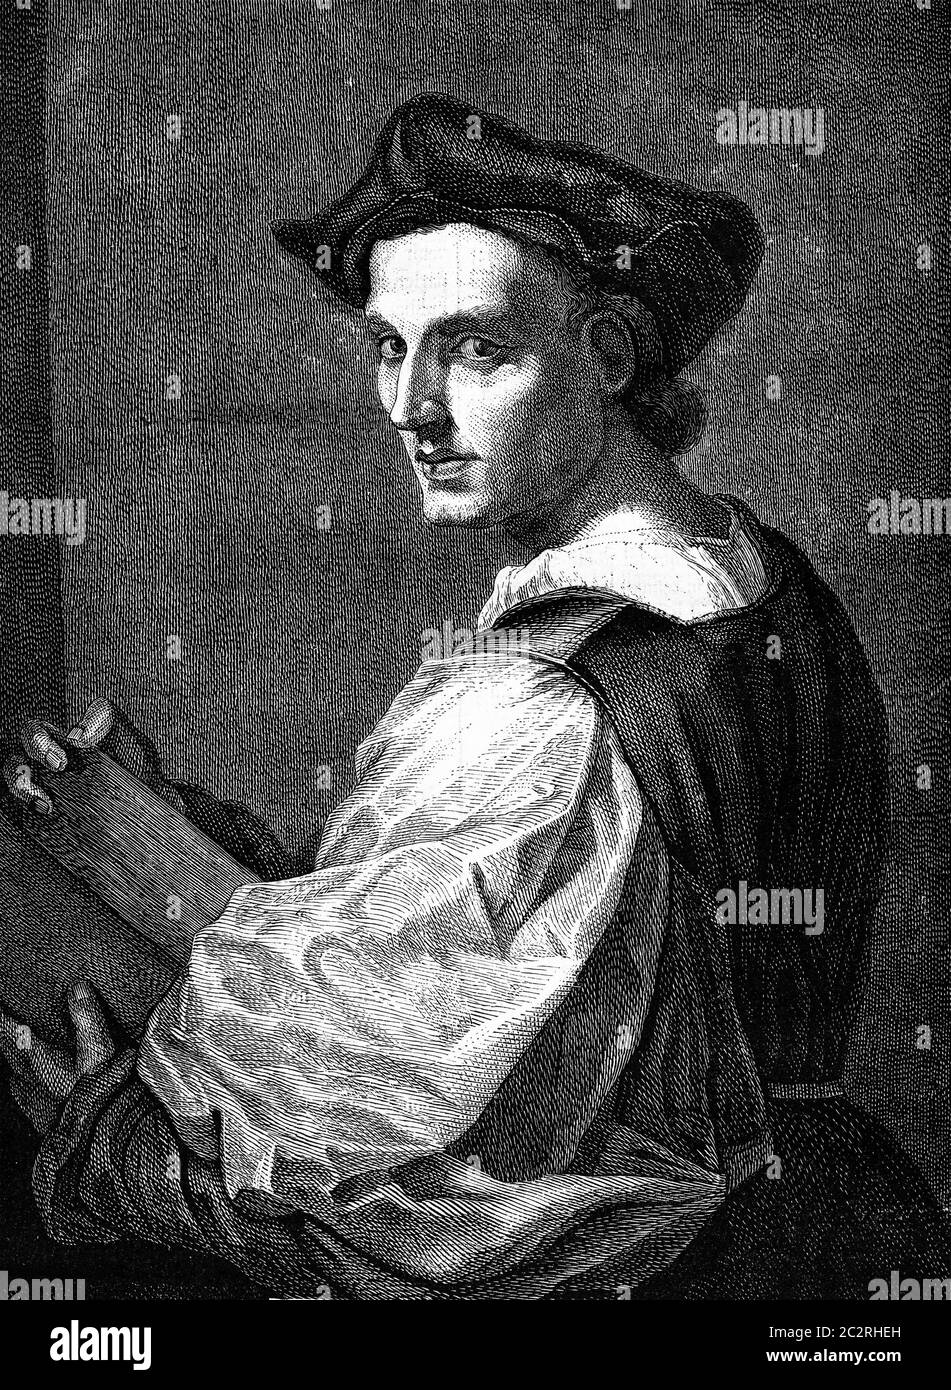 A portrait by Andrea del Sarto, at the National Gallery in London, vintage engraved illustration. Magasin Pittoresque (1882). Stock Photo